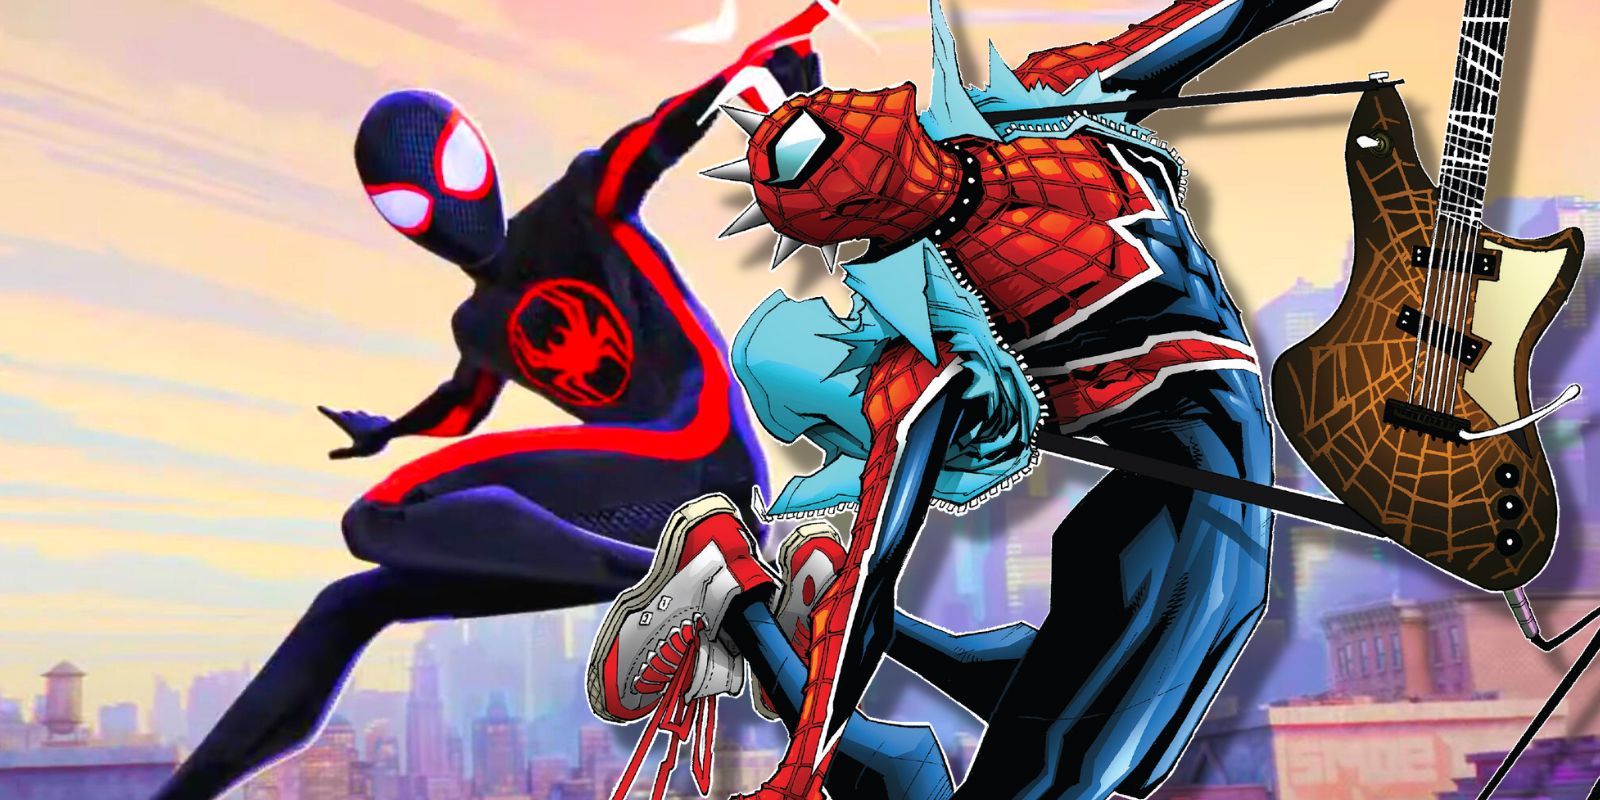 Miles Morales alongside a guitar-playing Spider-Punk